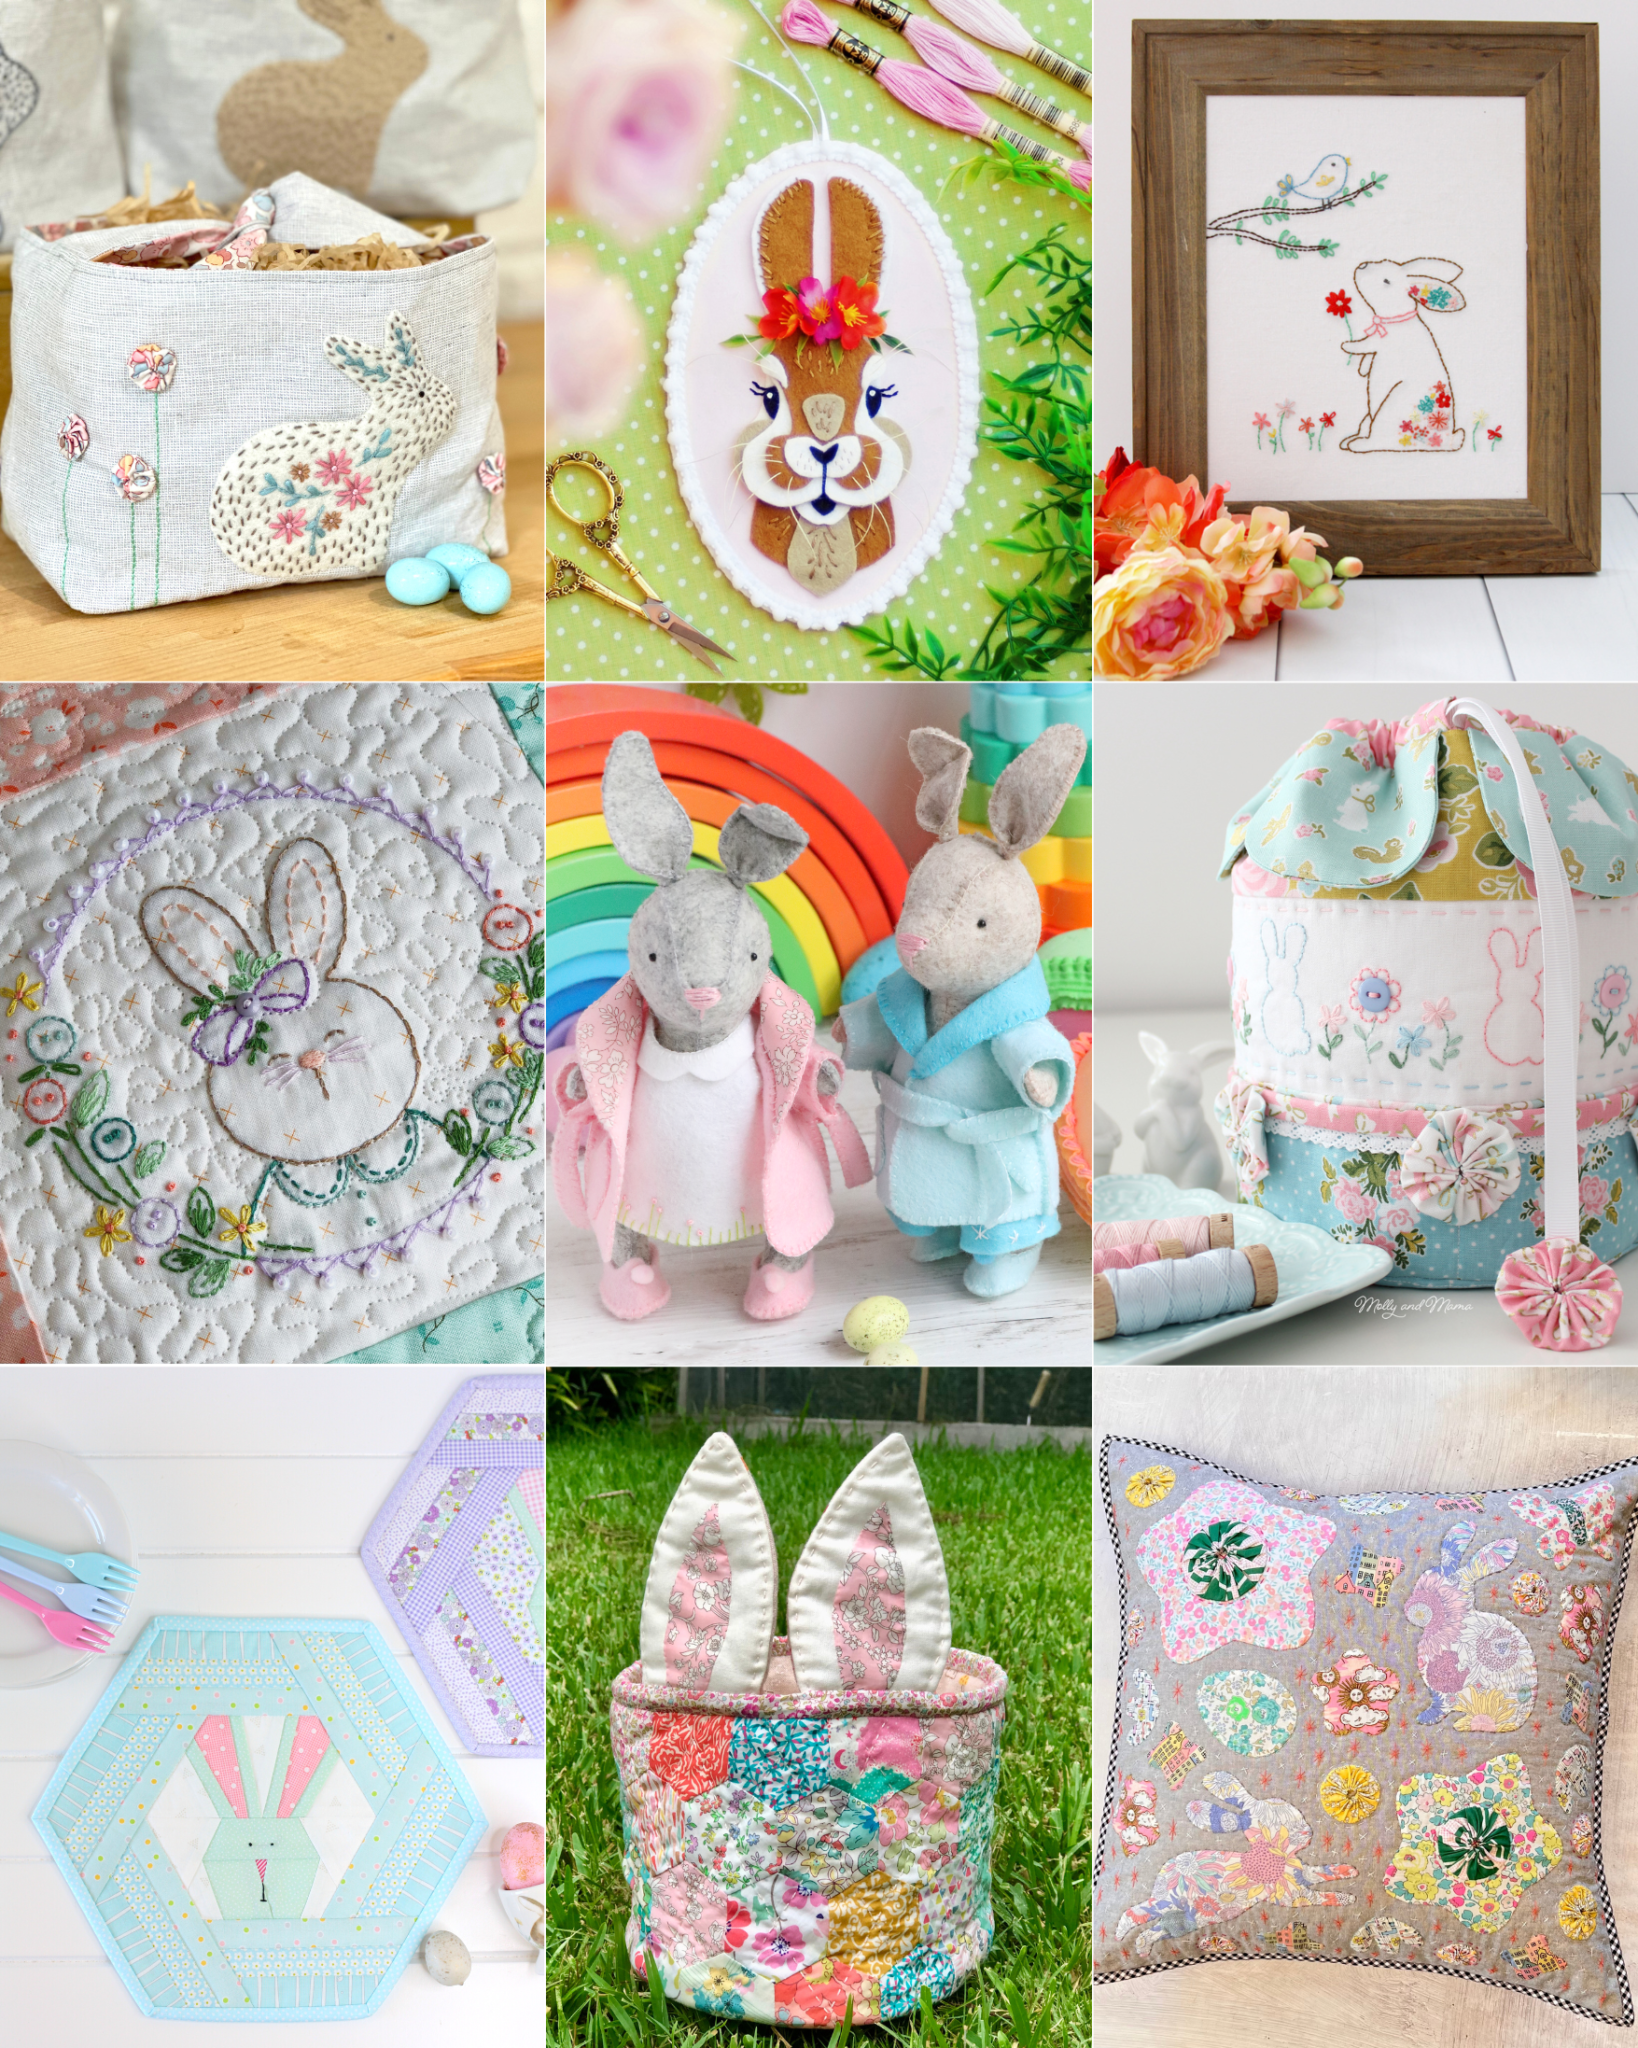 Introducing the Easter Makers Bundle of Sewing Patterns